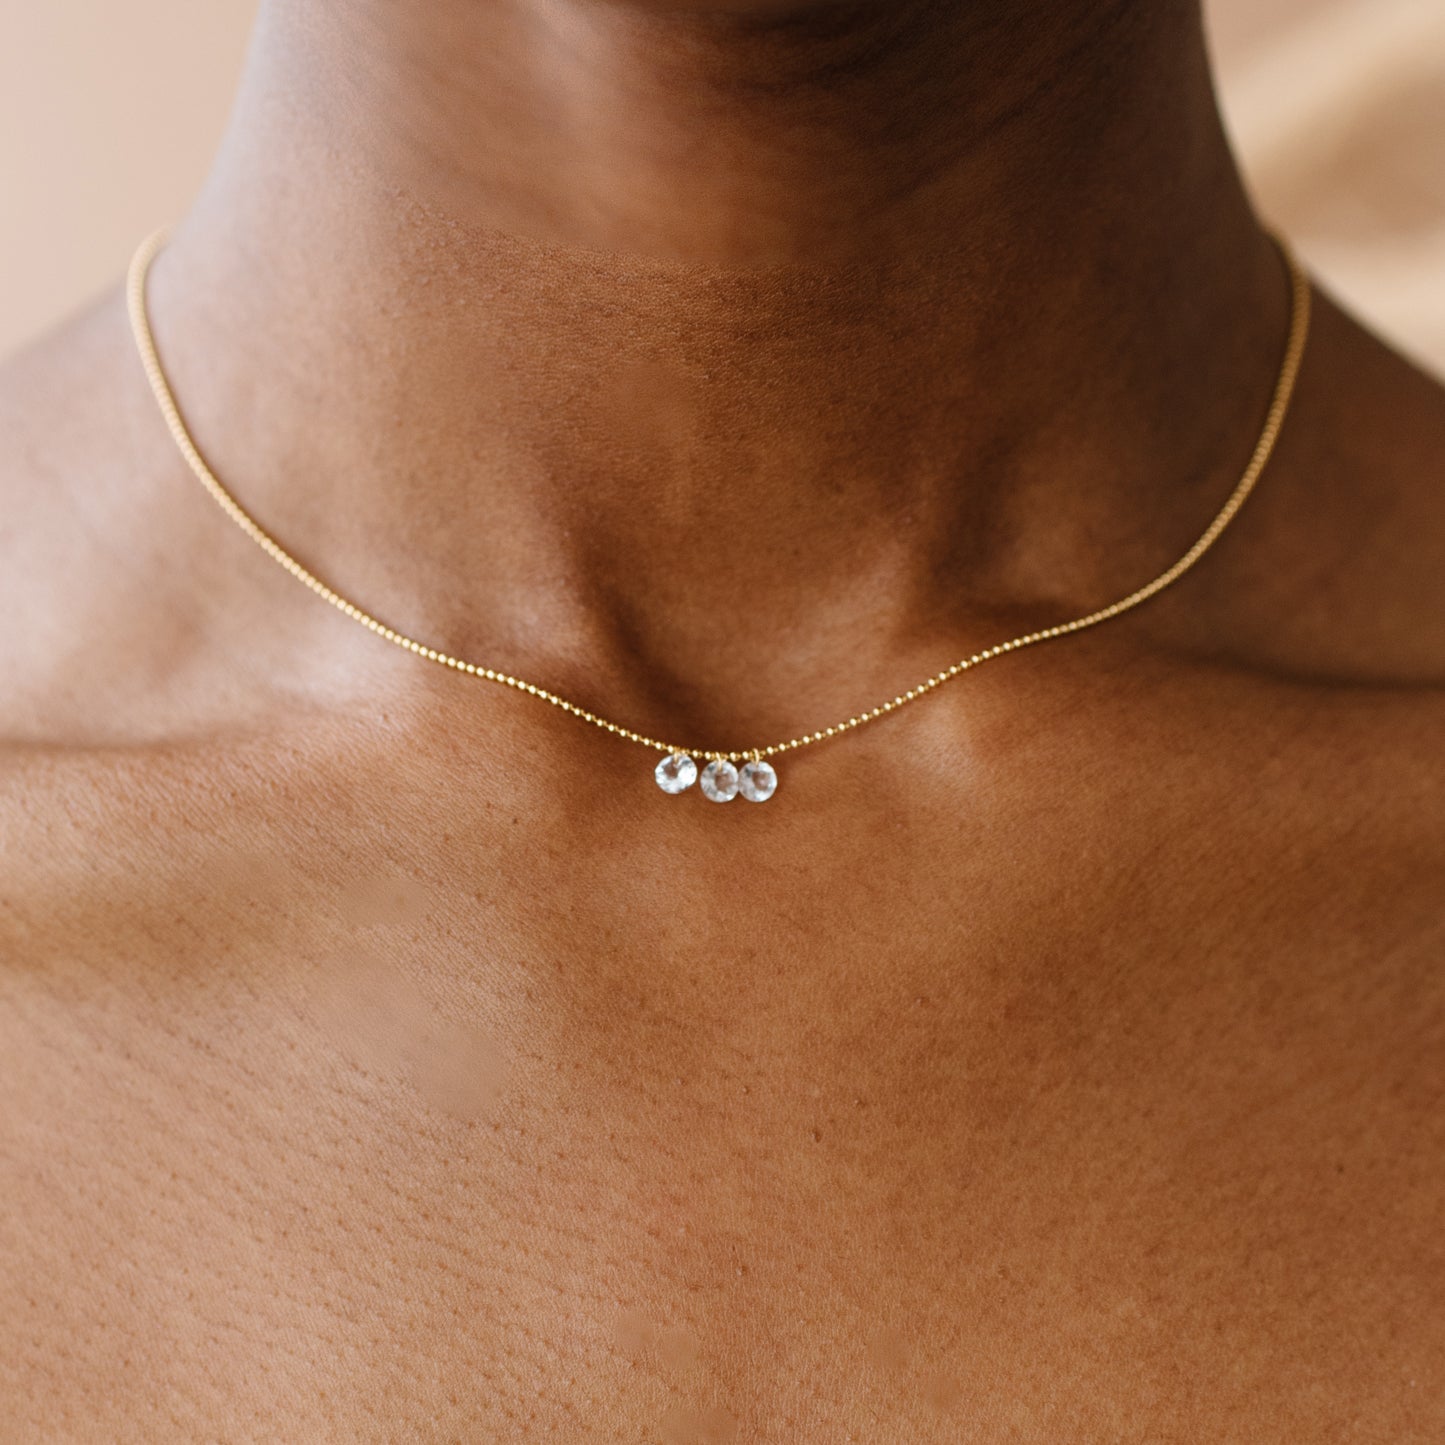 DAINTY RADIANT TRIO NECKLACE - CUBIC ZIRCONIA & GOLD - SO PRETTY CARA COTTER